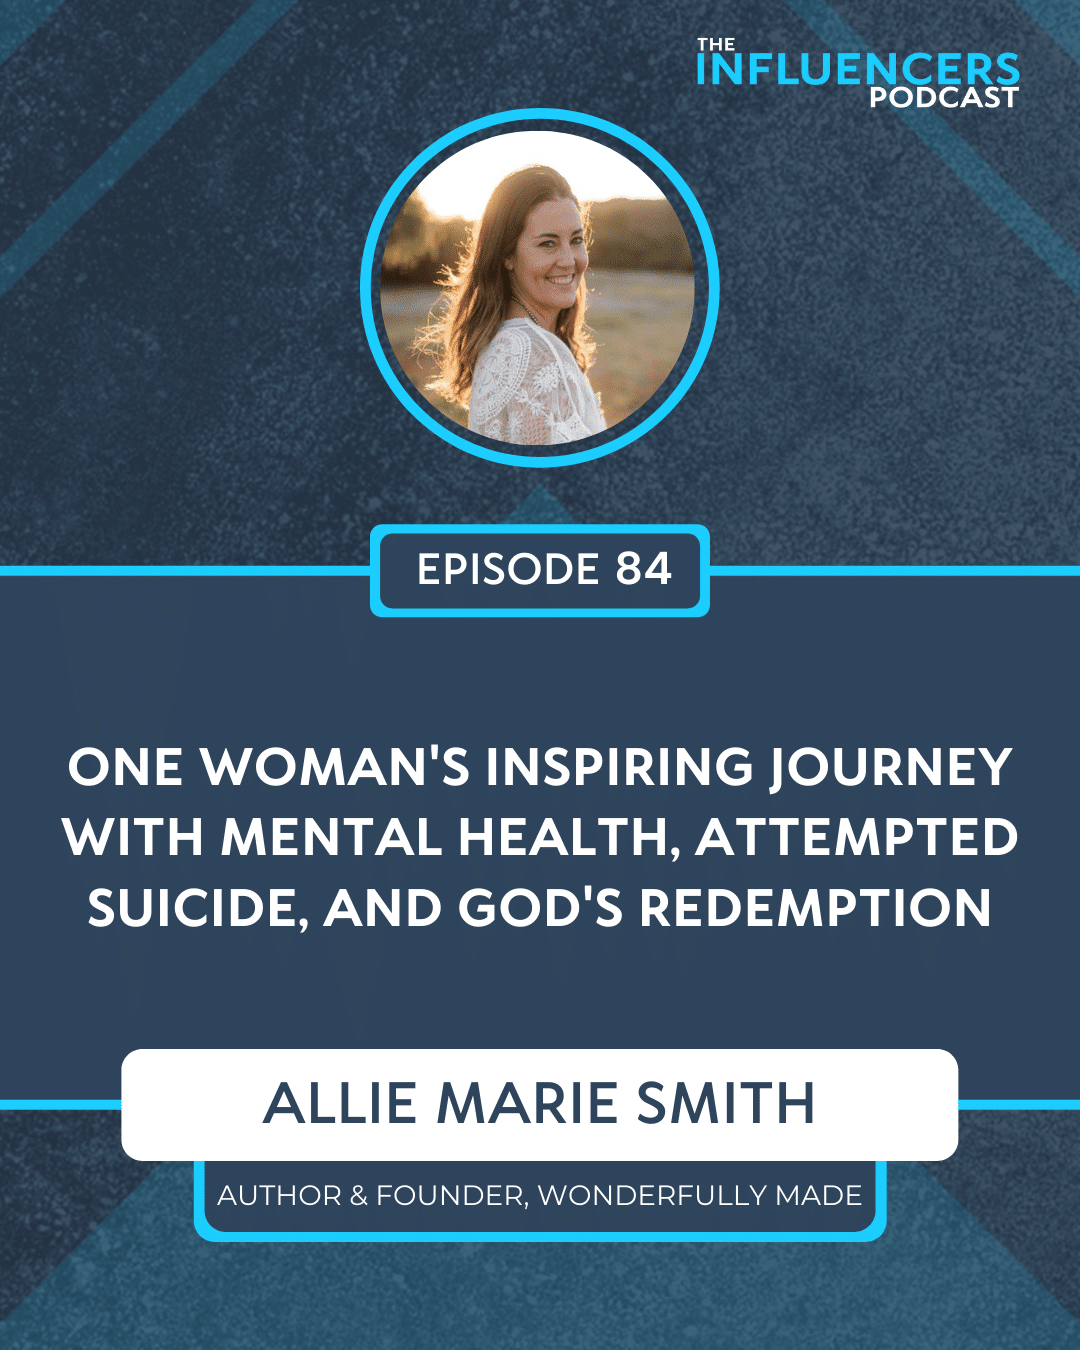 Episode 84 with Allie Marie Smith.